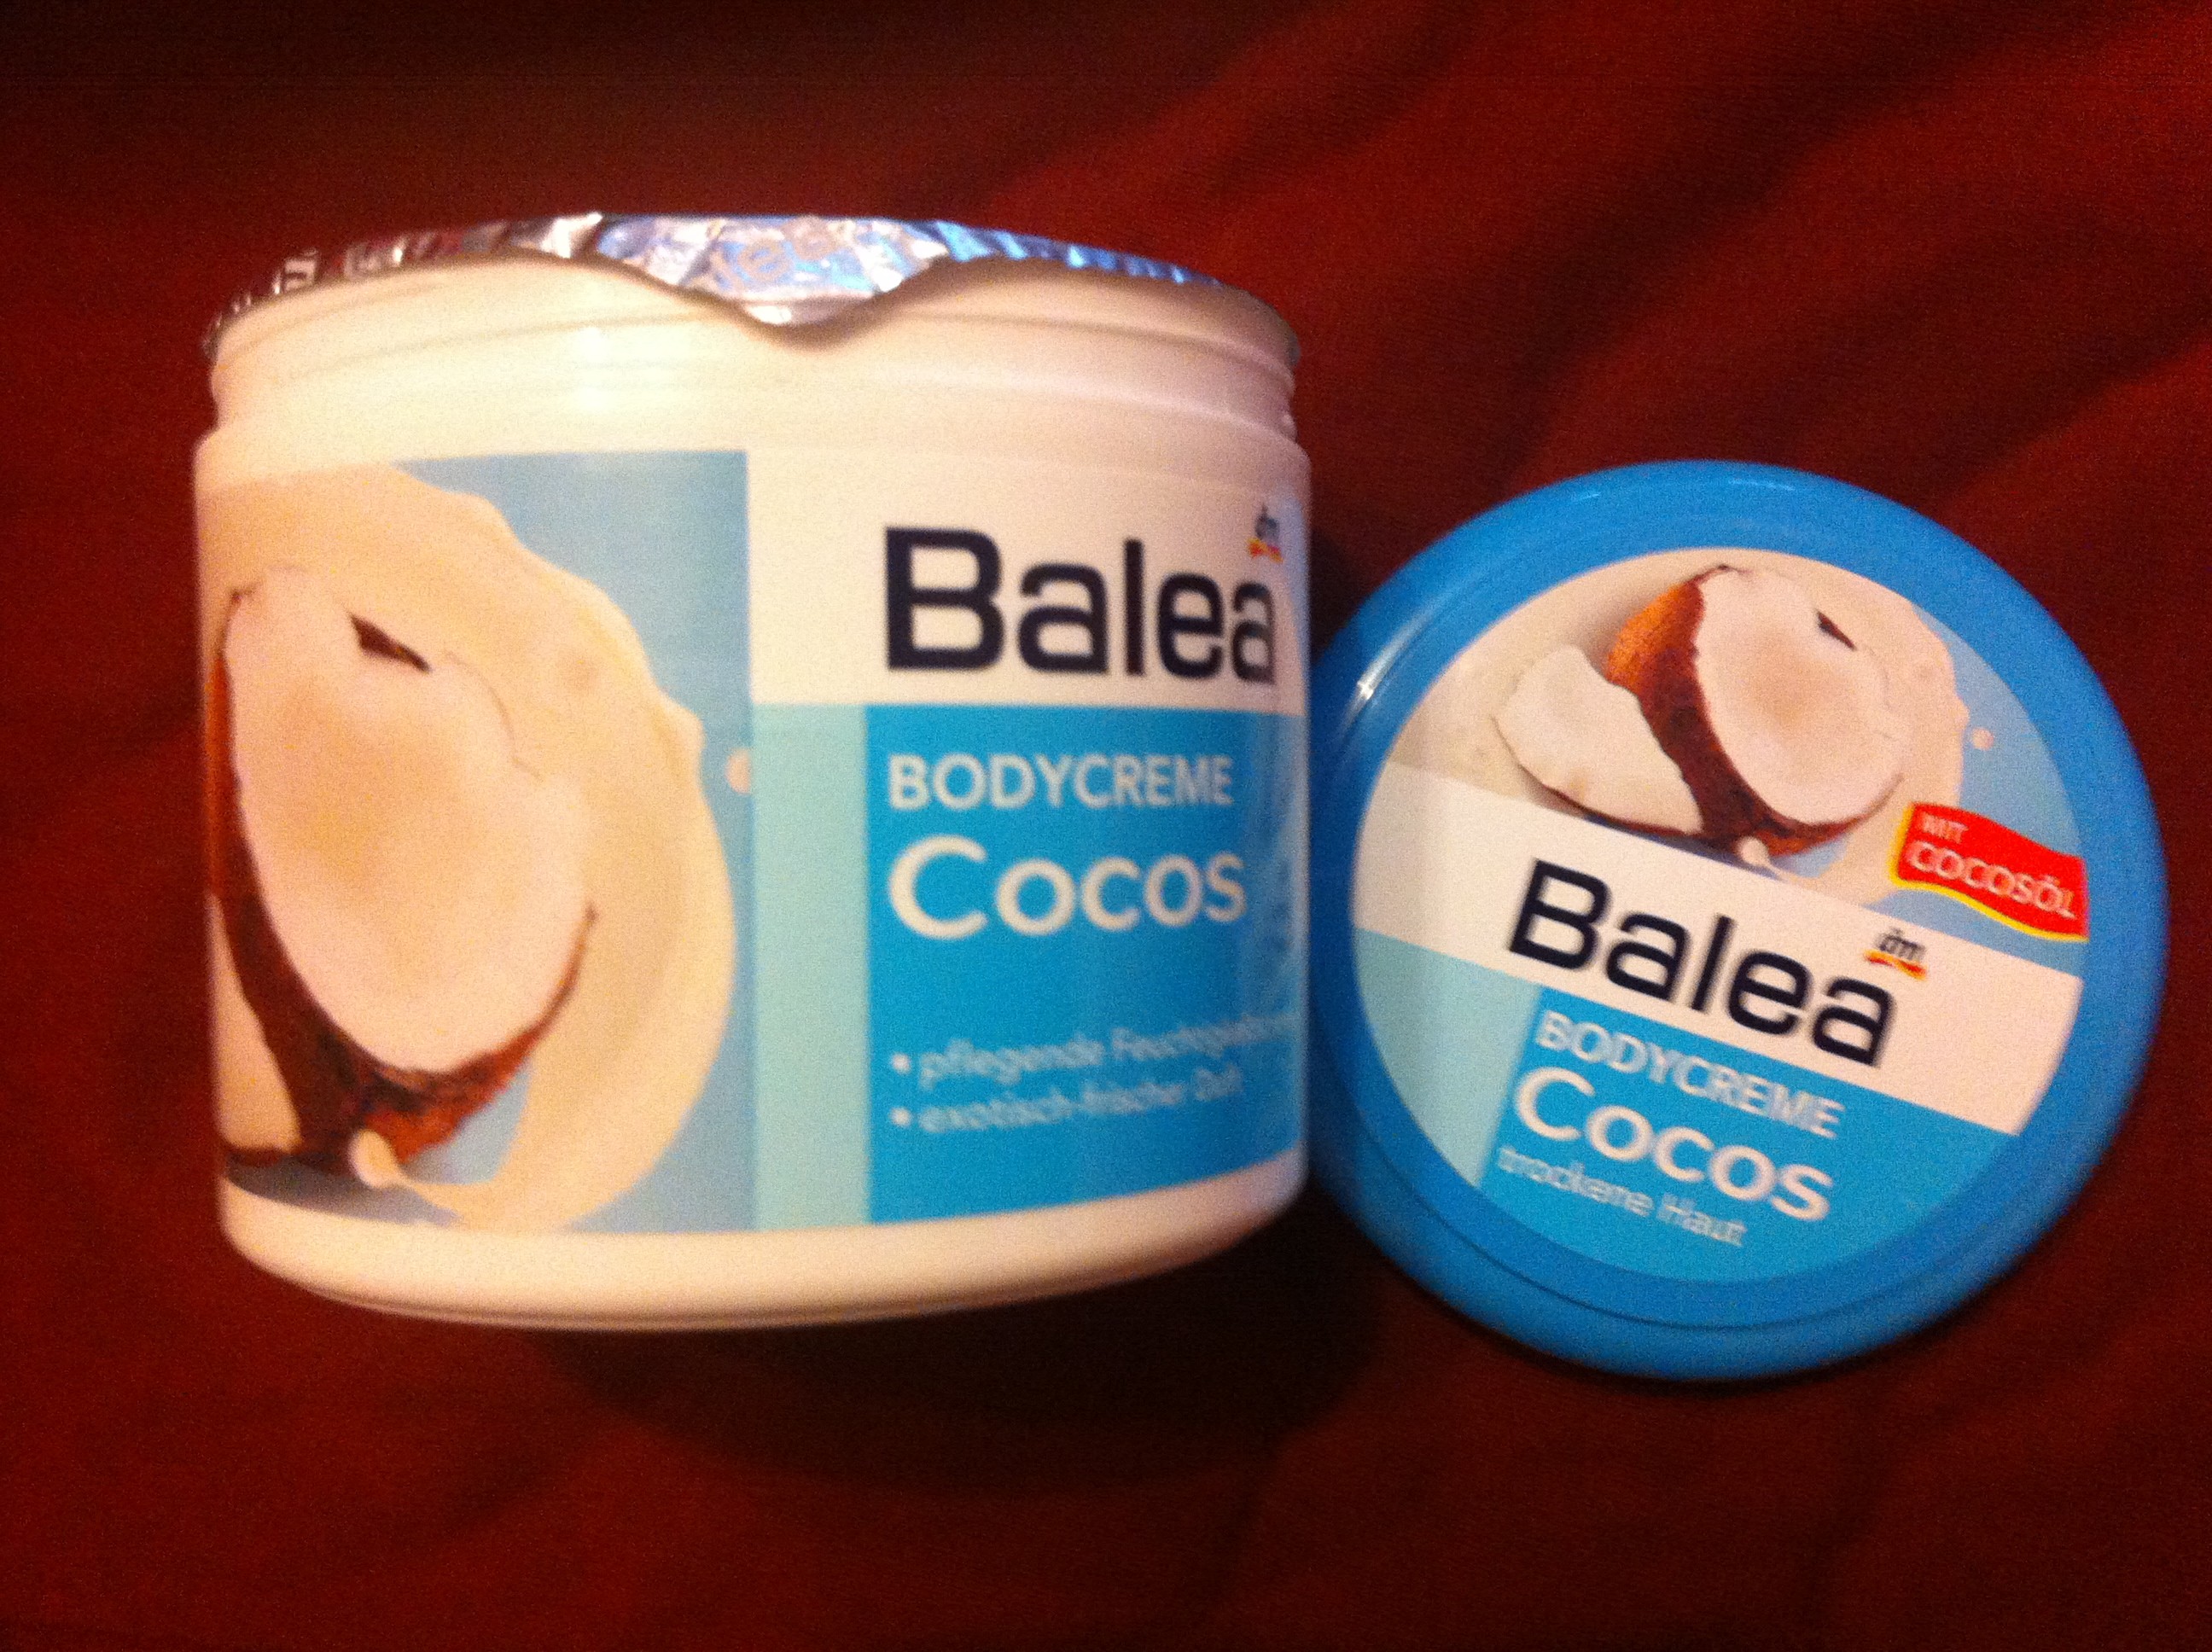 Balea Cocos Body Creme Beauty Reviewed At All Levels